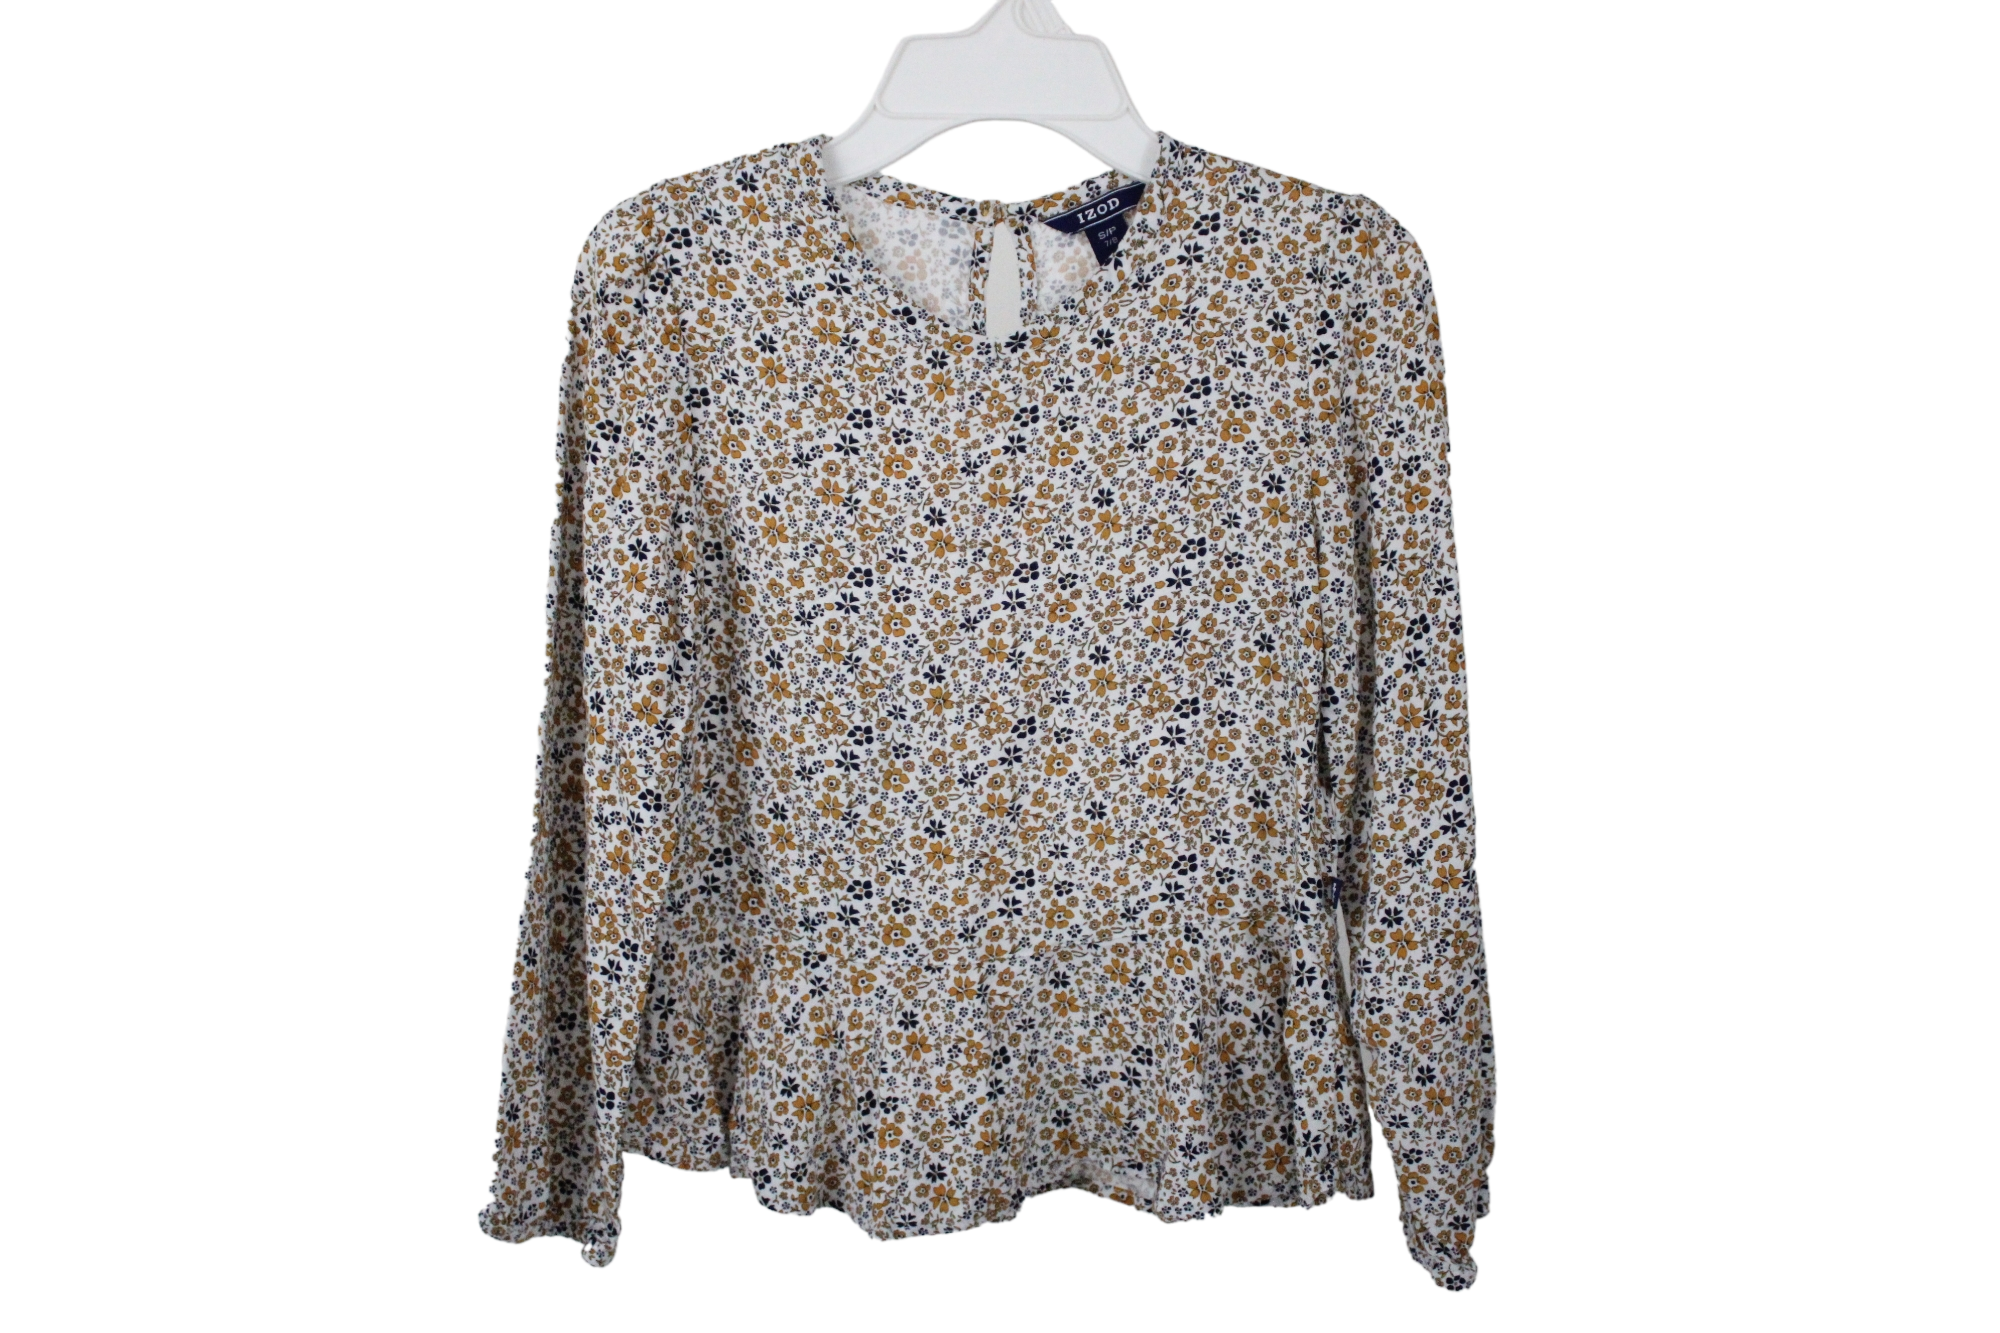 Izod Yellow Floral Top | 7/8